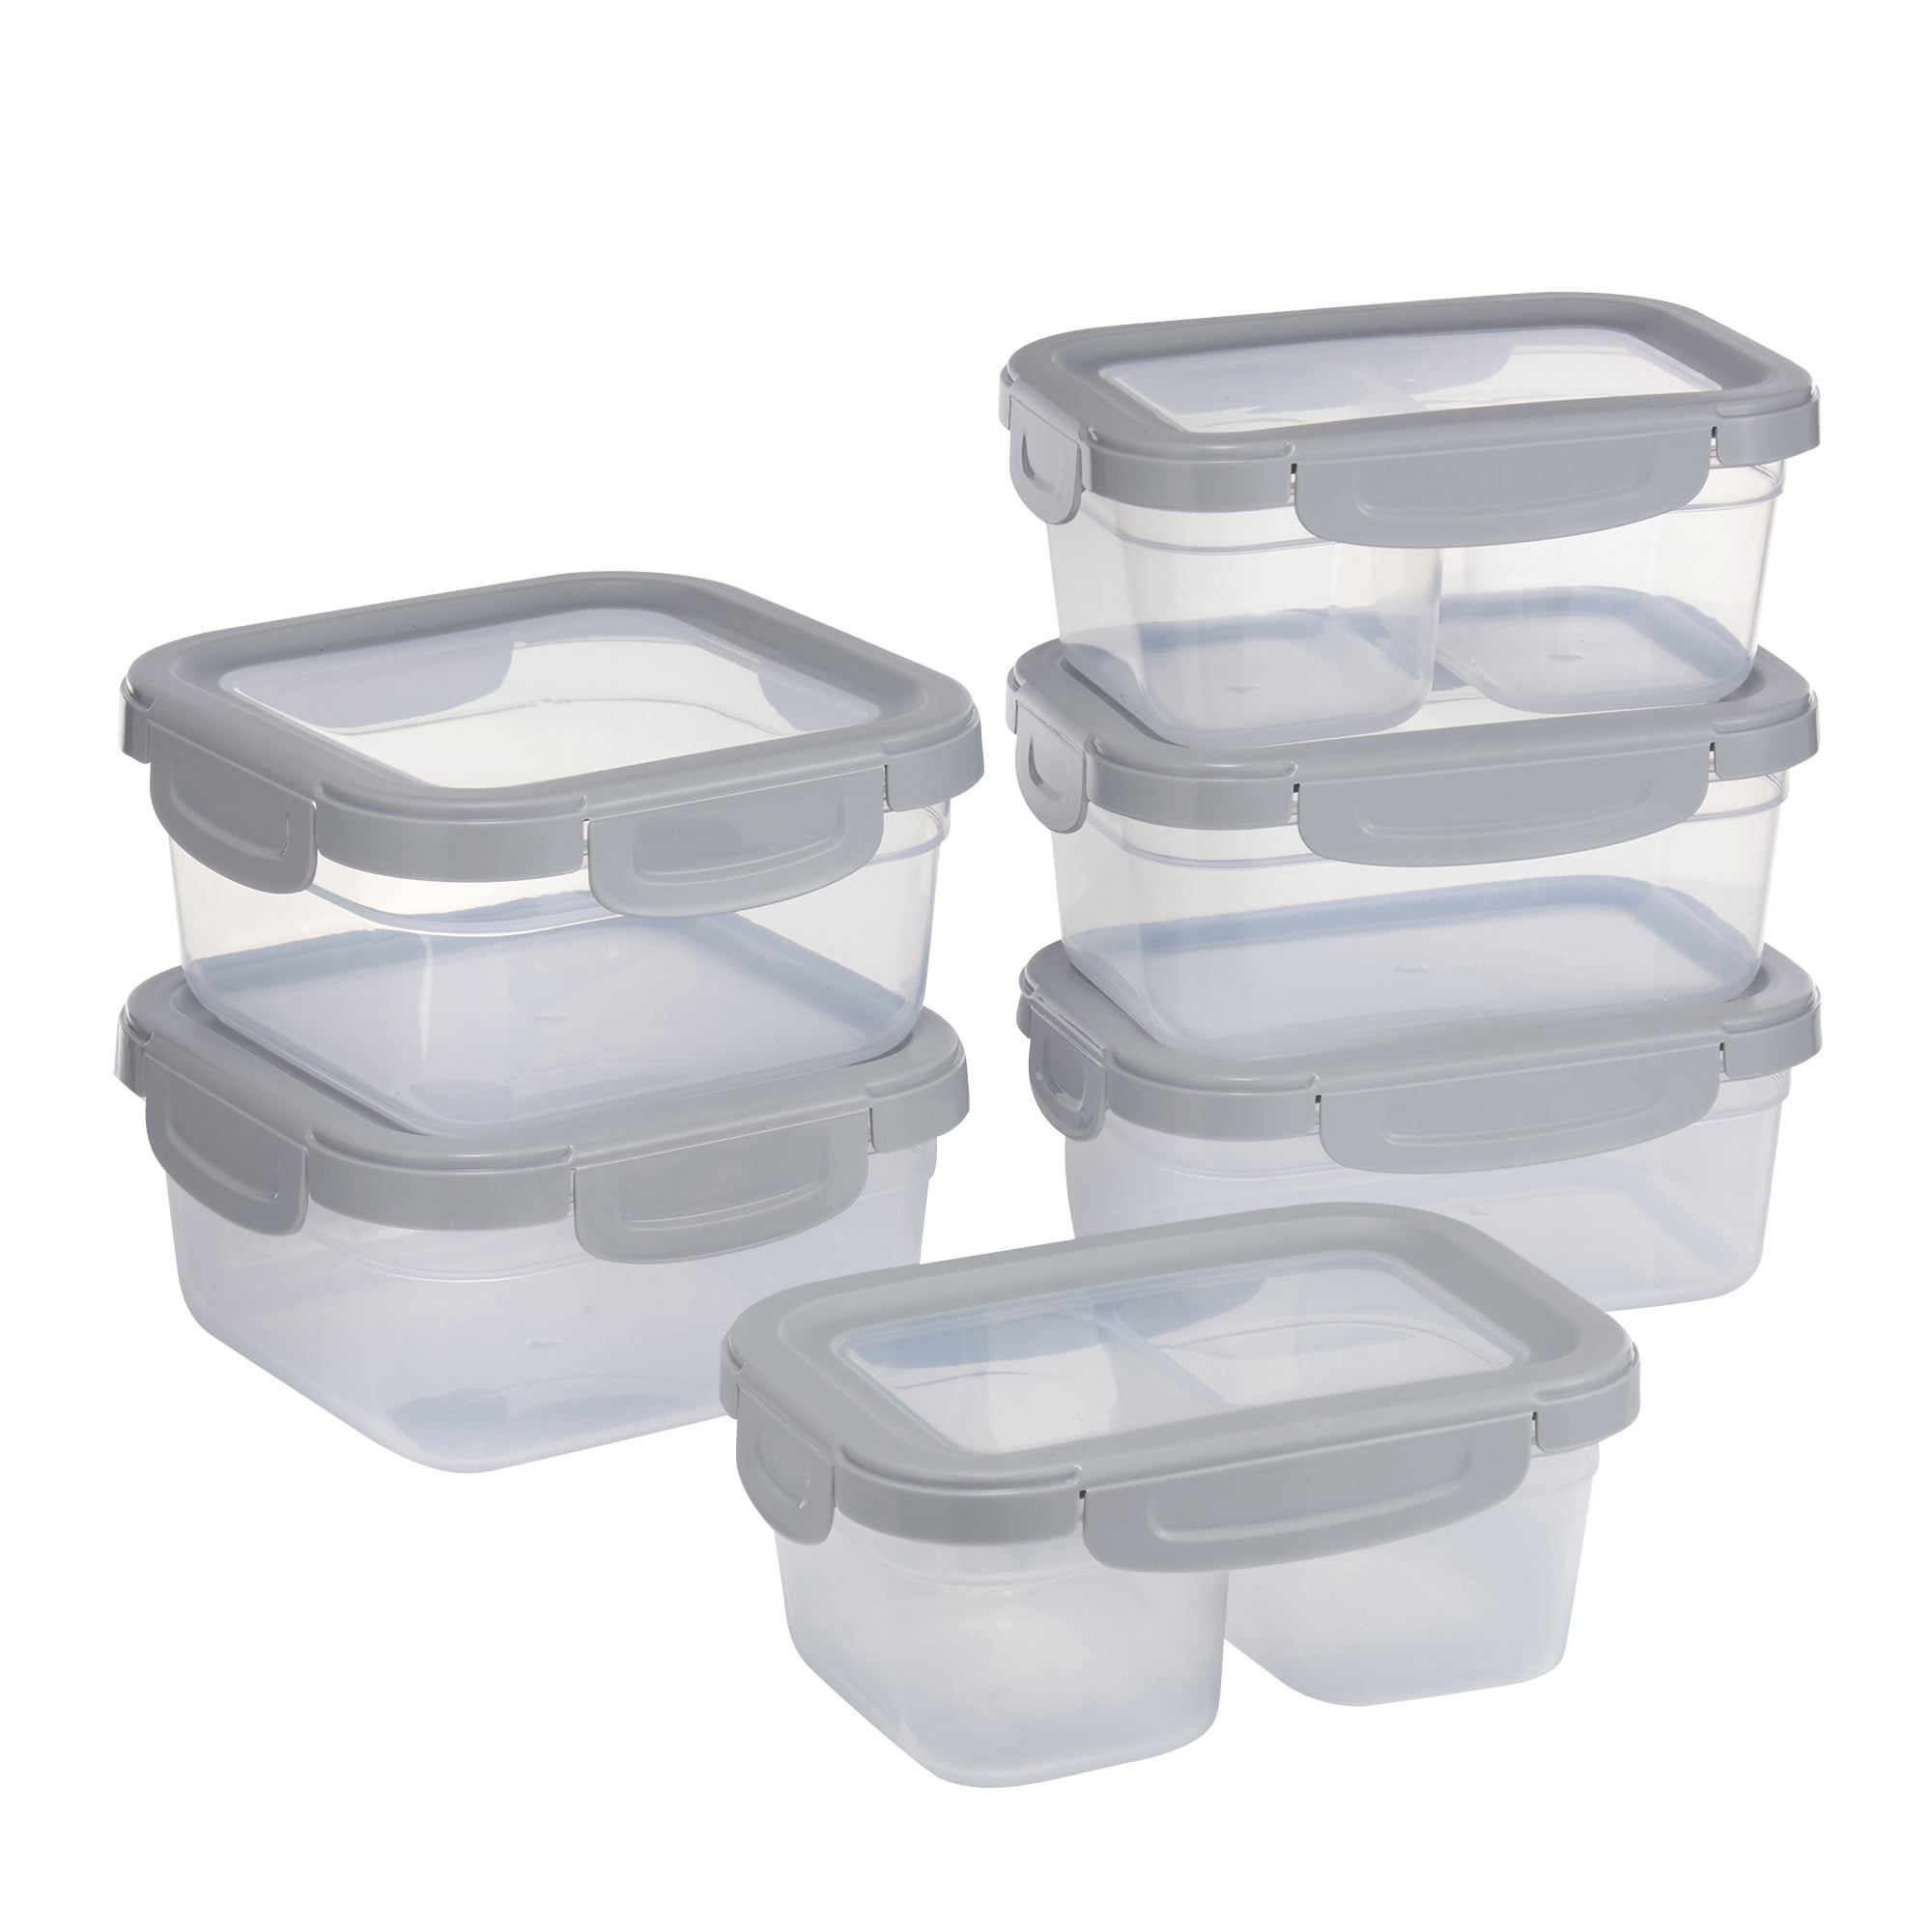 Mainstays Meal Prep Food Storage Containers, 15 Count 